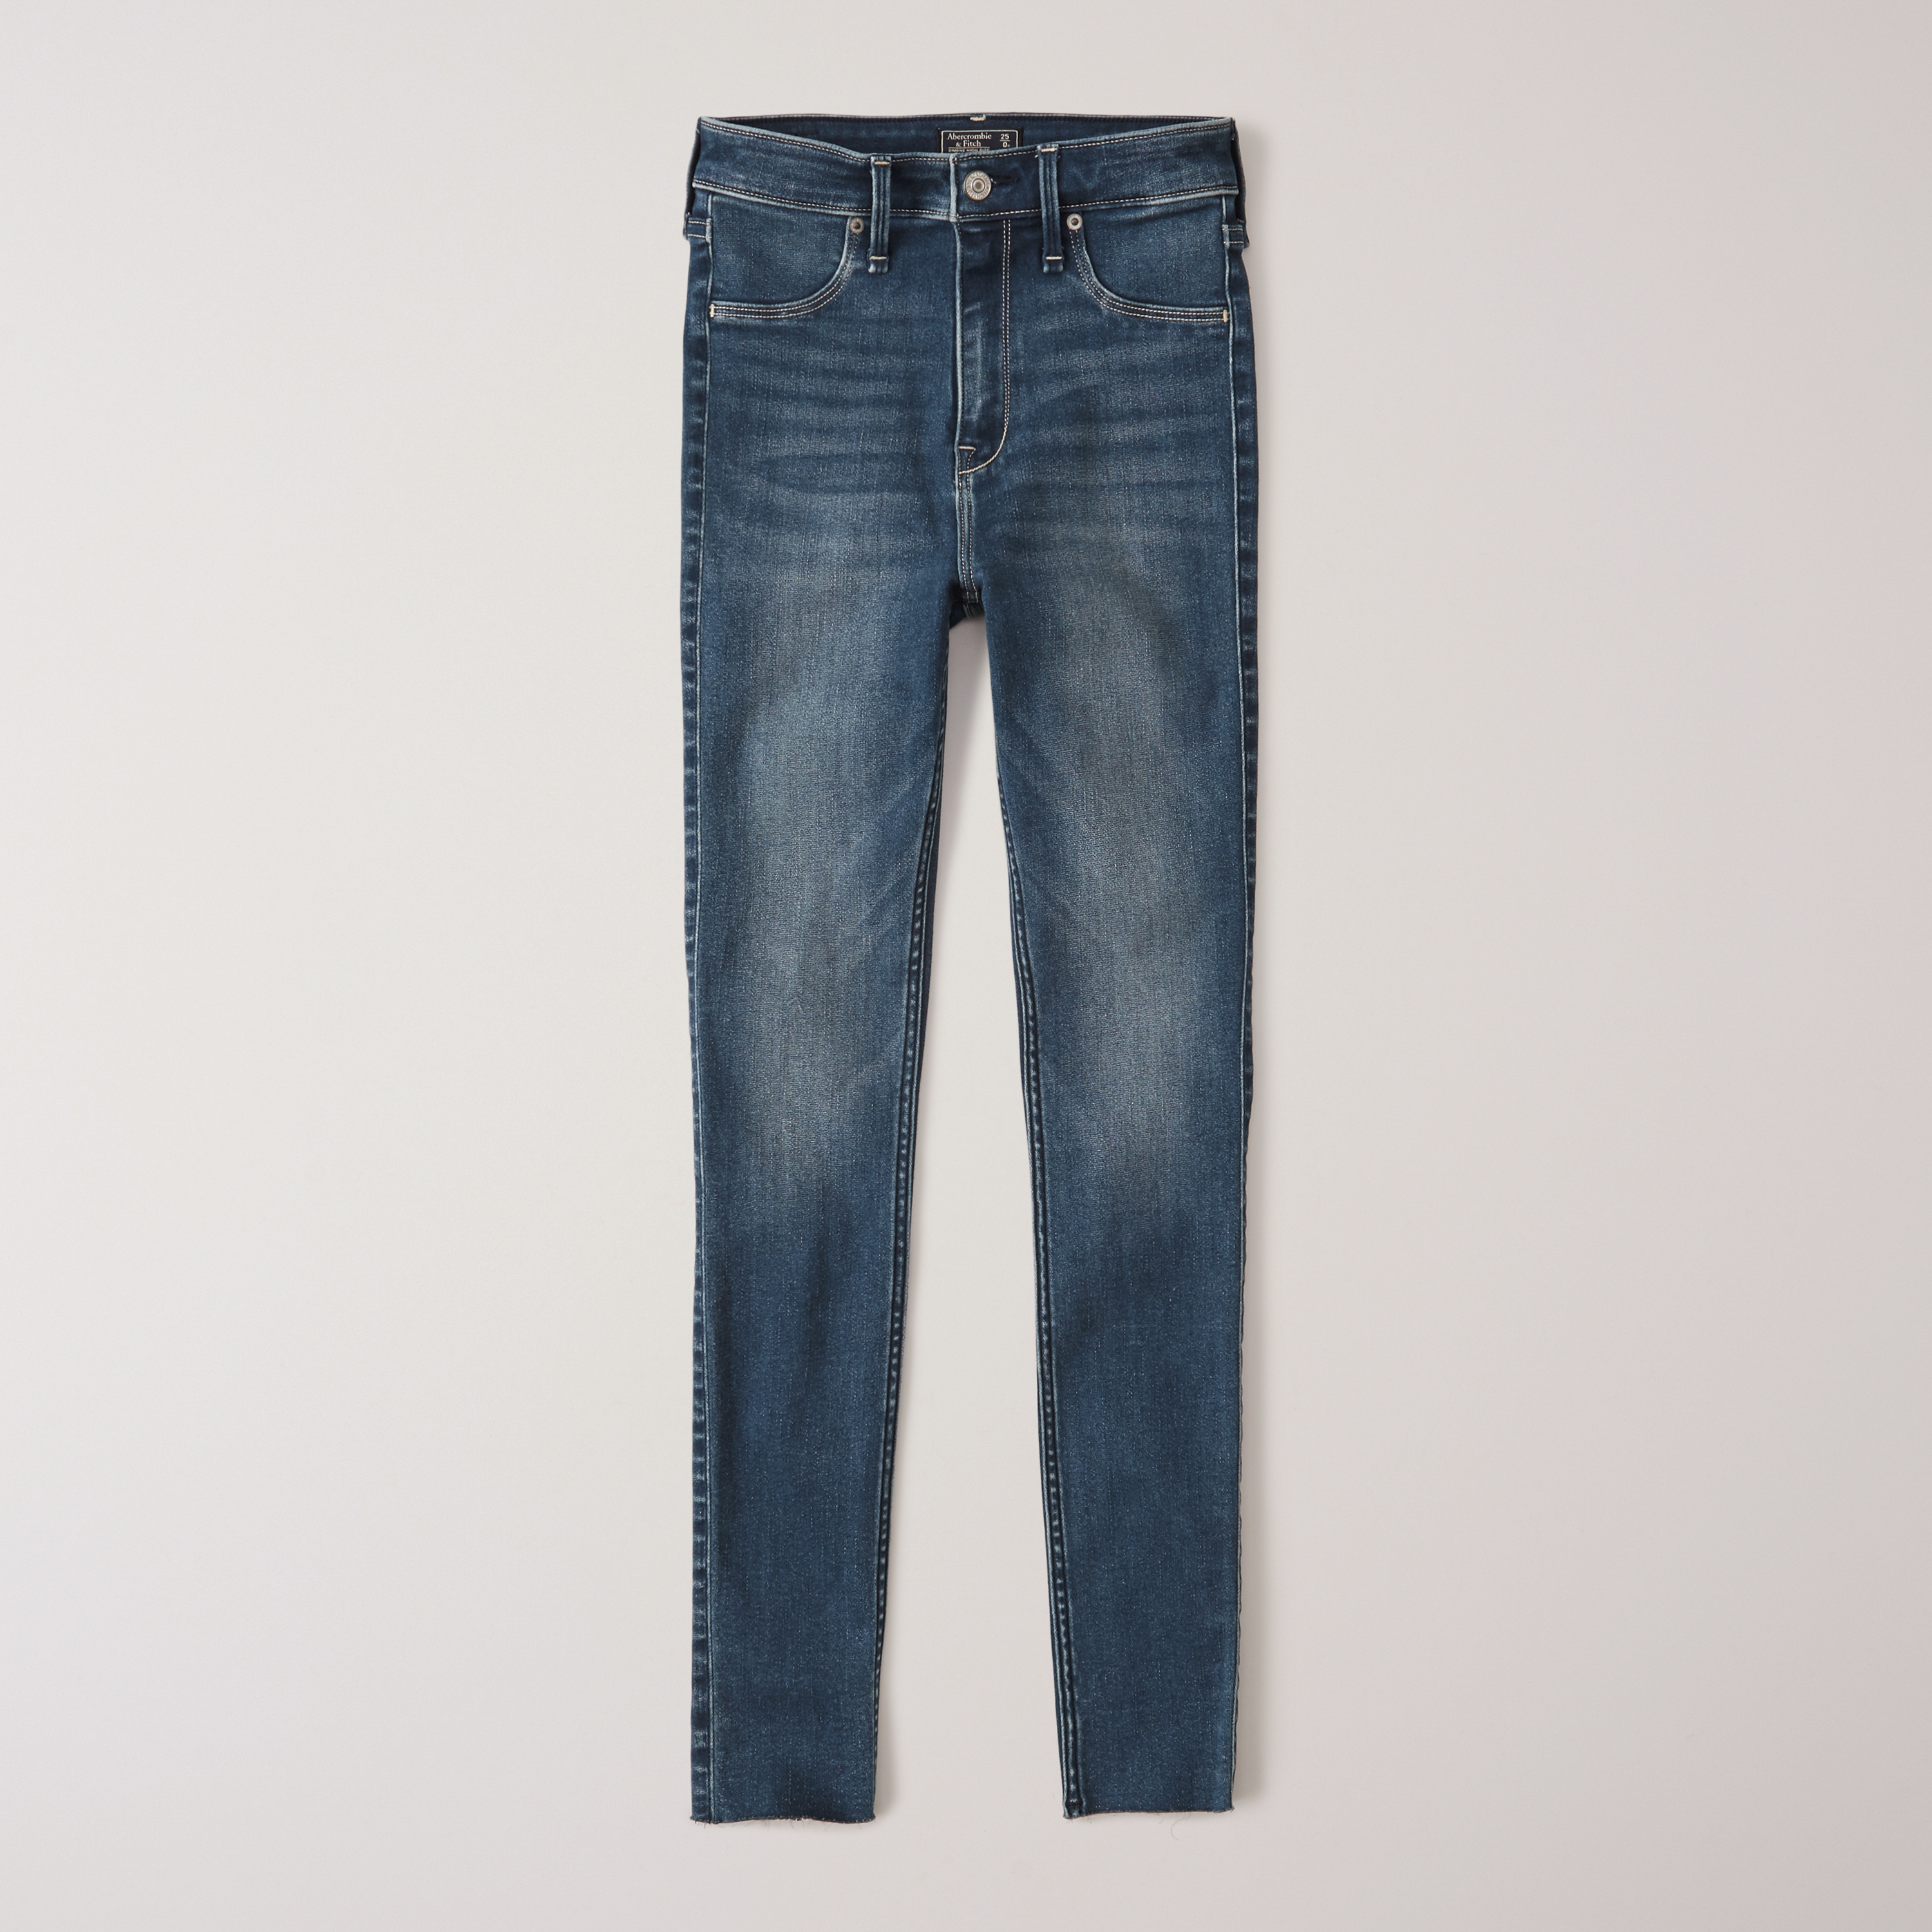 abercrombie jeans size guide